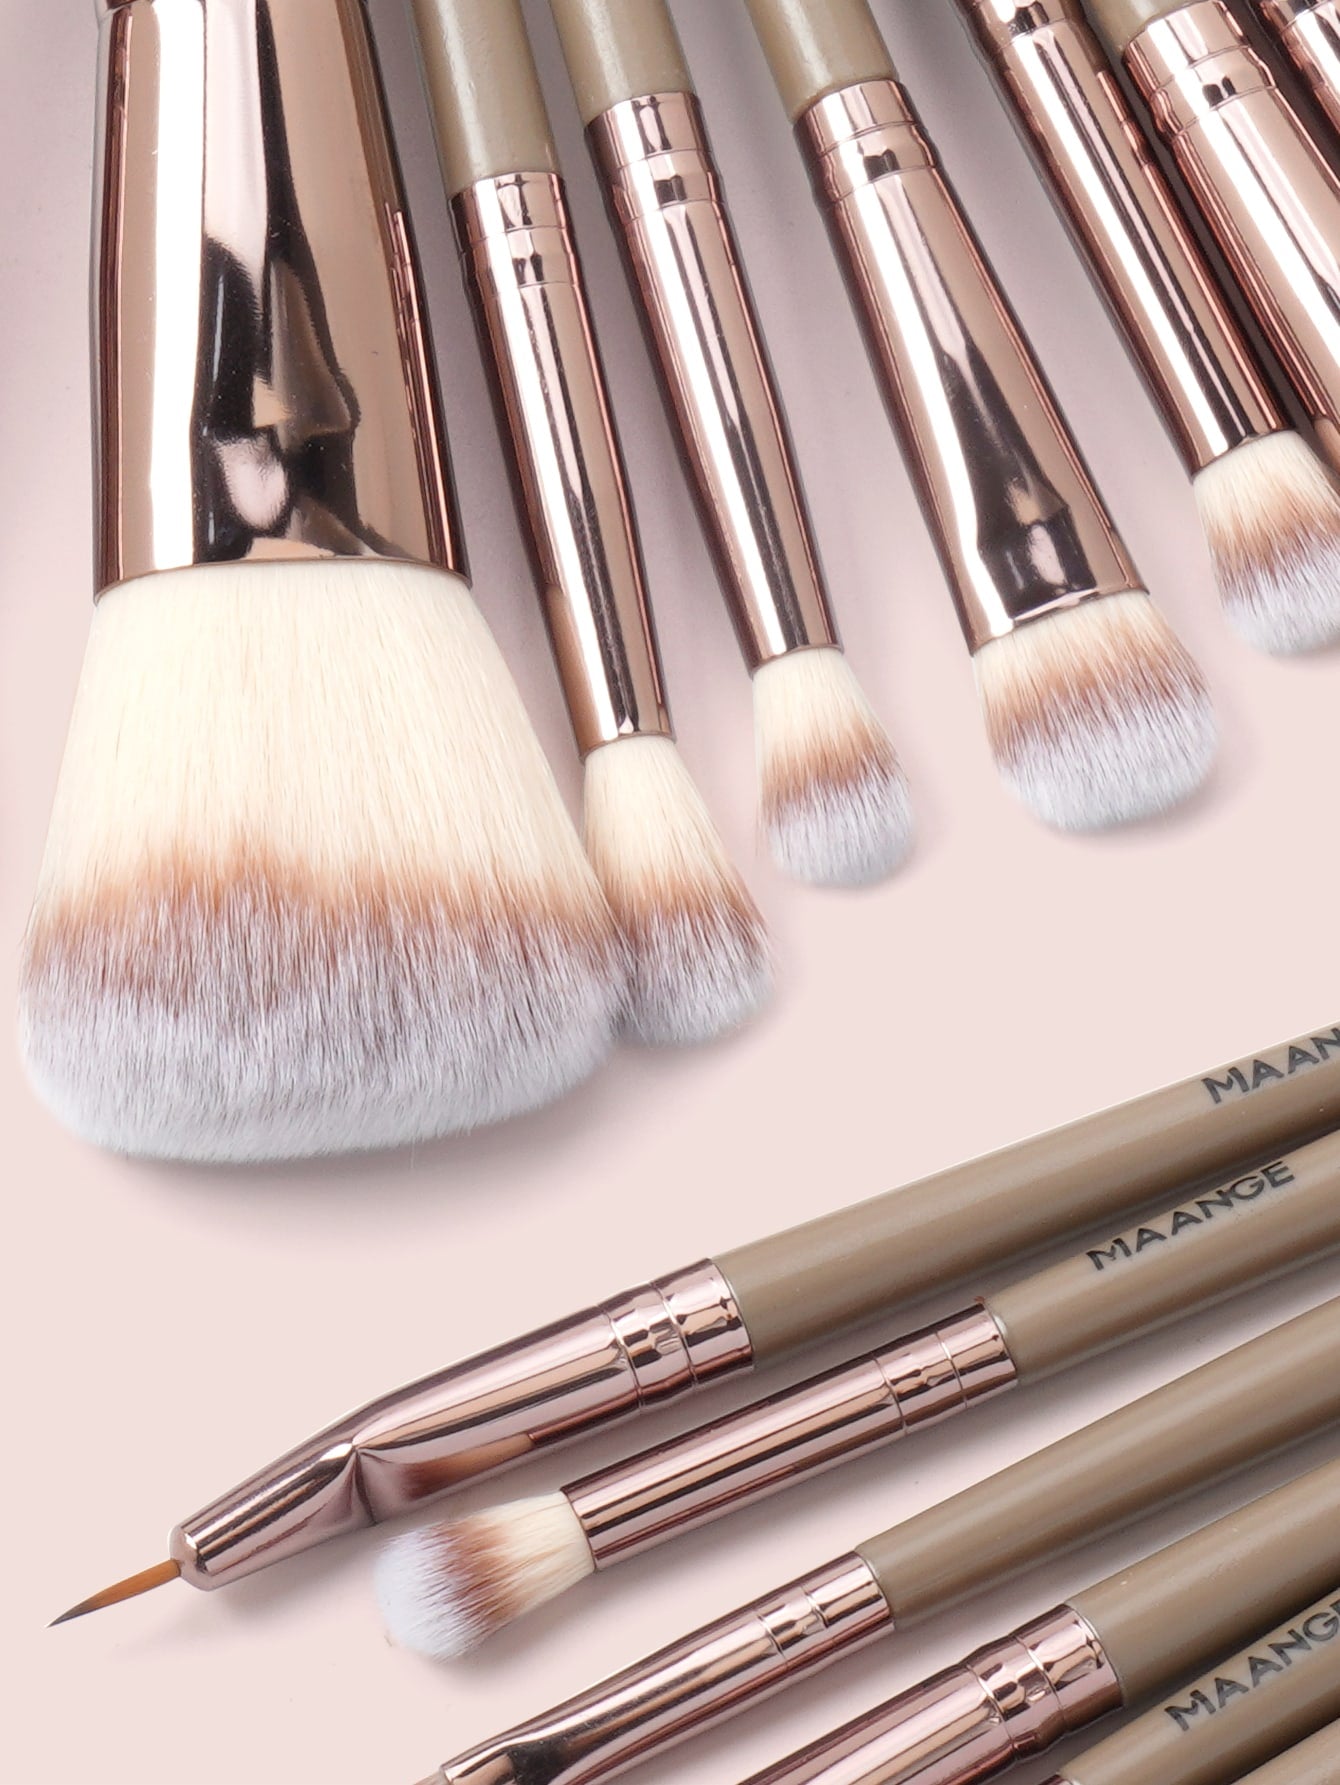 20pcs Professional Makeup Brush Set,Makeup Tools With Soft Brush Hair For Easy Carrying,Foundation Brush,Eye Shadow Brush,Eyebrow Brush,Concealer Brush,Contour Brush,Brush Set For Travel - Negative Apparel